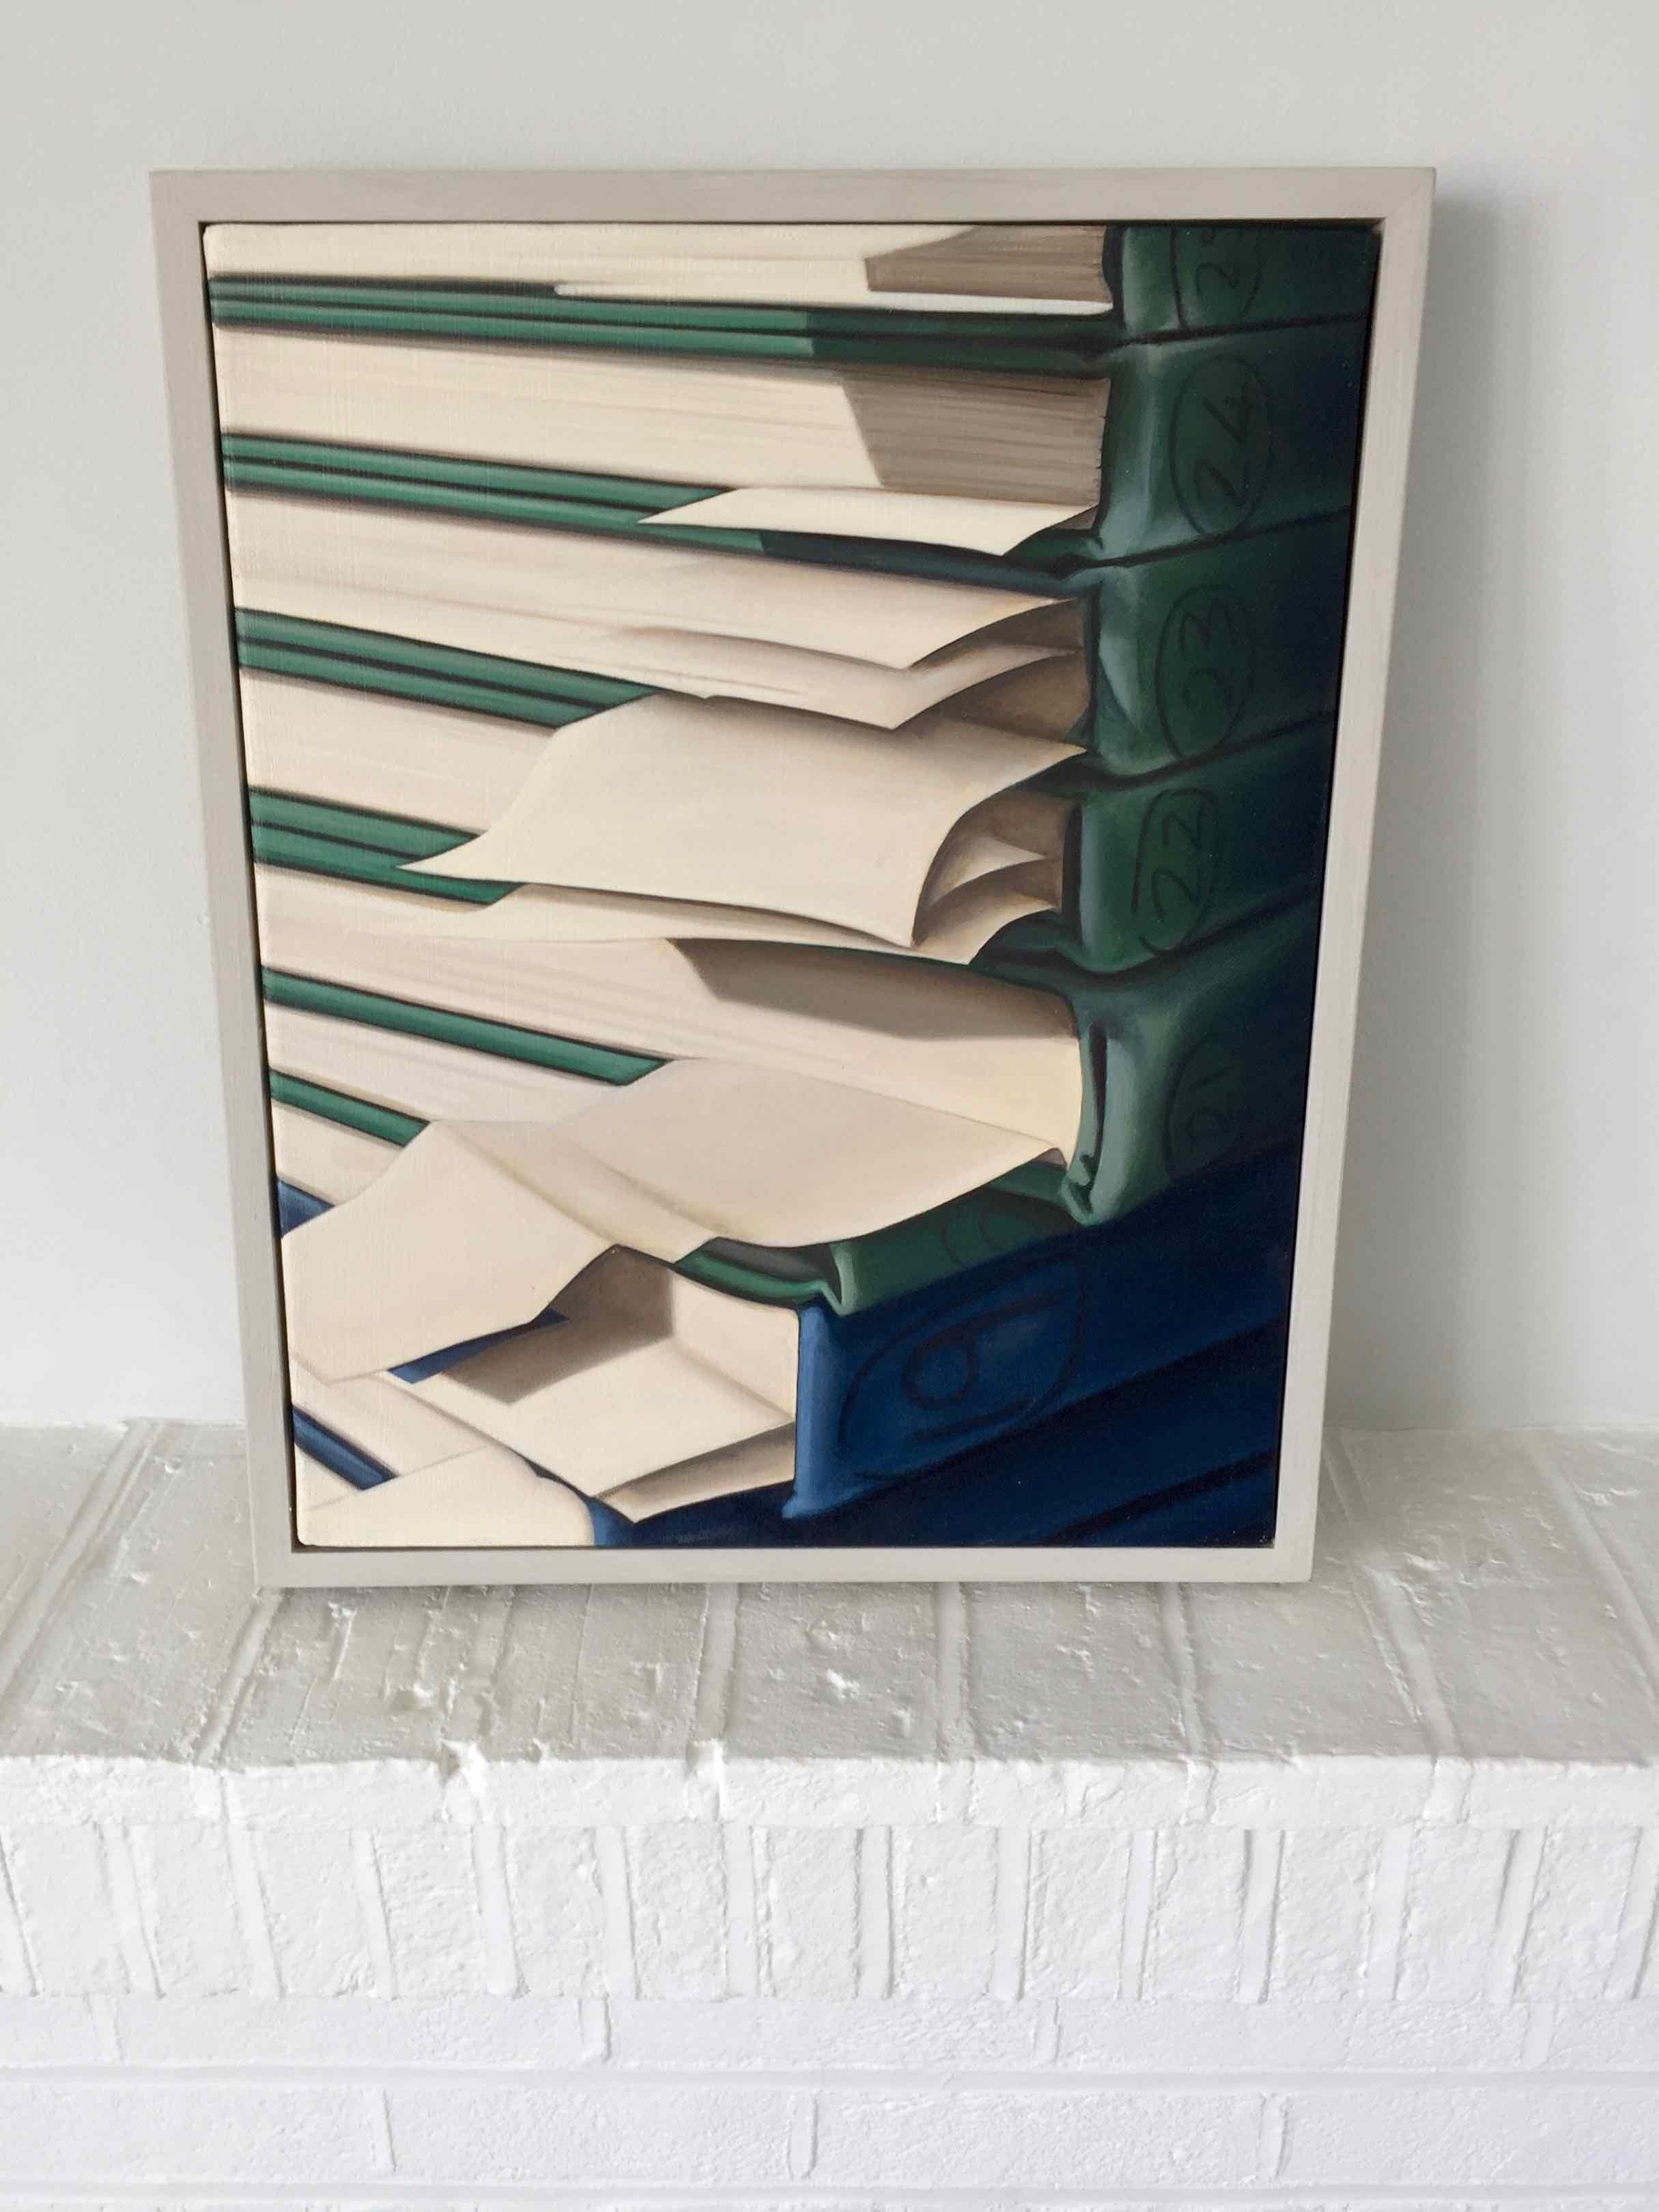 Chelsea Arts Club: a Photorealistic painting of sketchbooks by Ian Robinson 1